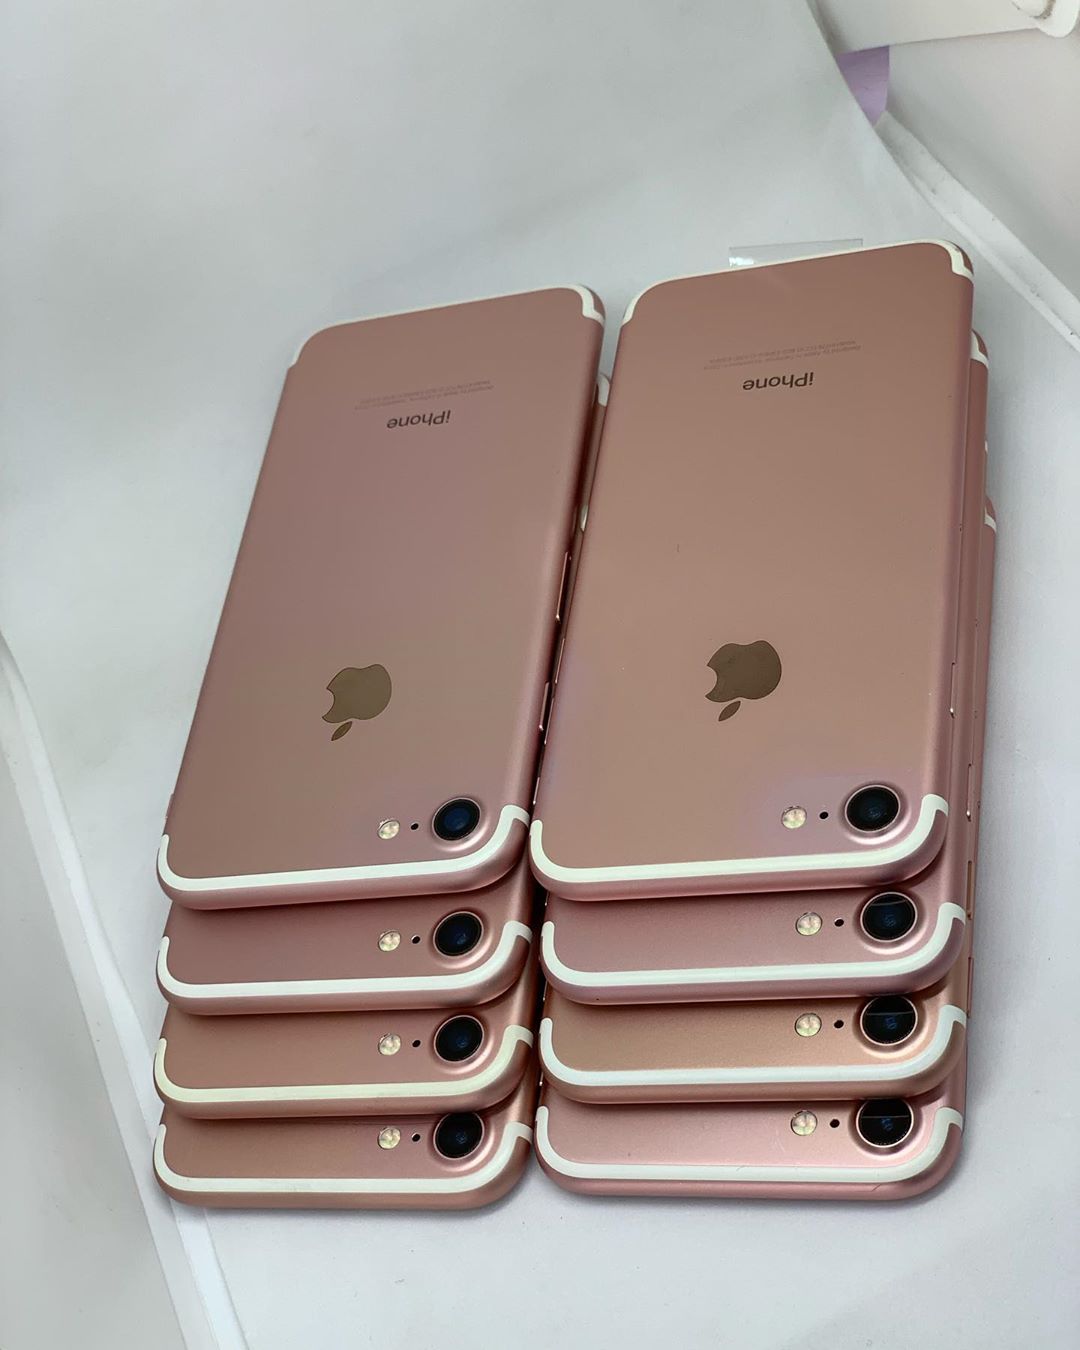 Thread For Clean UK Used Iphones, Best Prices You Can Ever Get In Lagos -  Phone/Internet Market - Nigeria